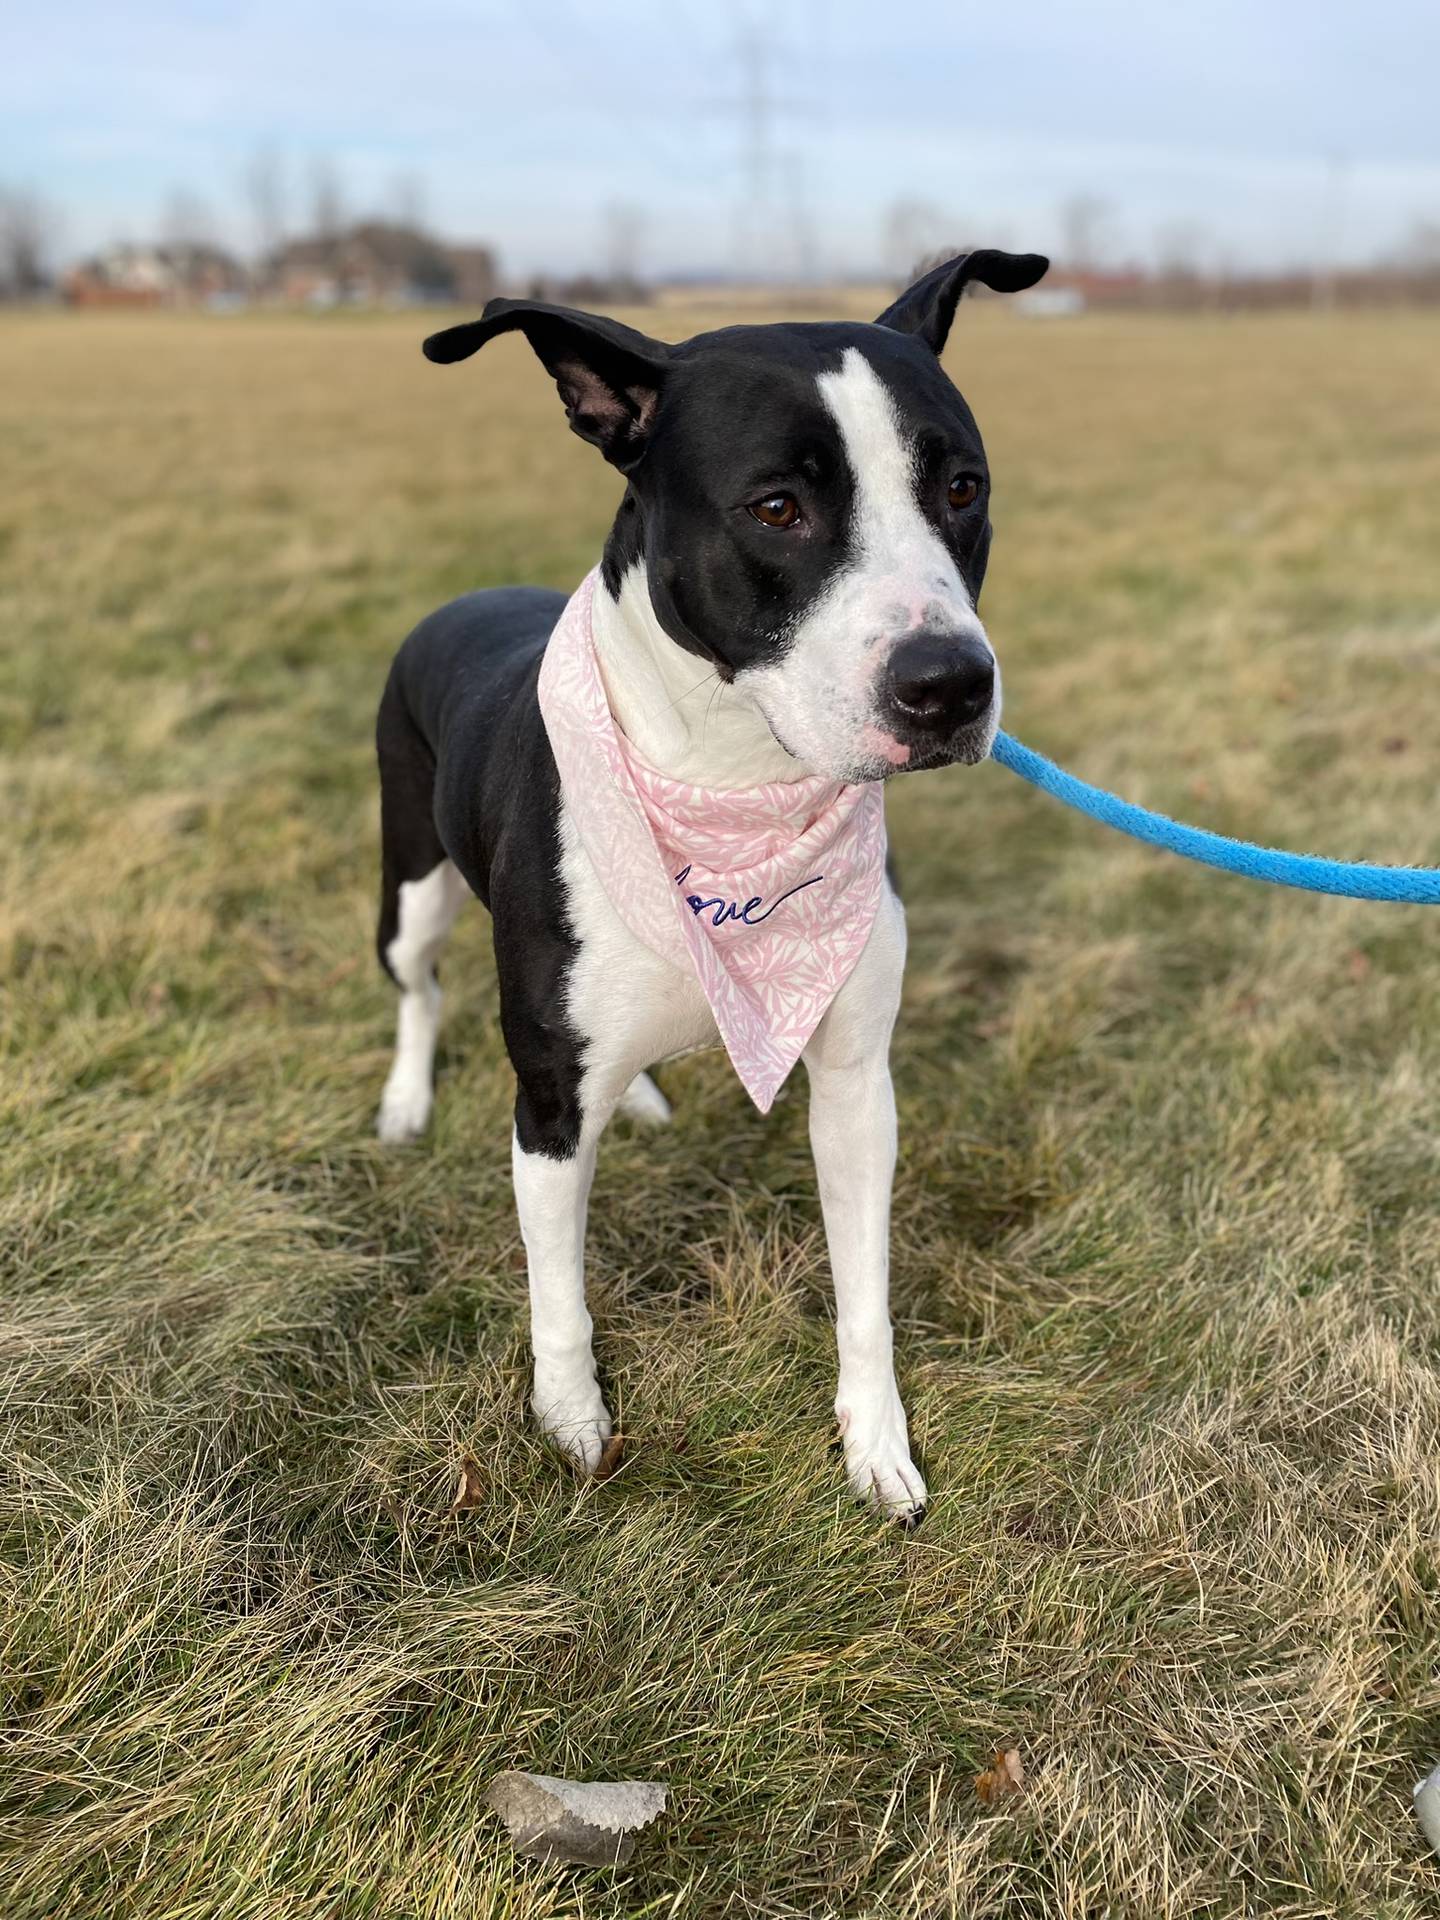 Dolly is a 4-year-old silly, playful and energetic terrier. She gets along with other dogs and loves to be around people. She is affectionate, polite and potty-trained. To meet Dolly, email Dogadoption@nawsus.org. Visit nawsus.org.